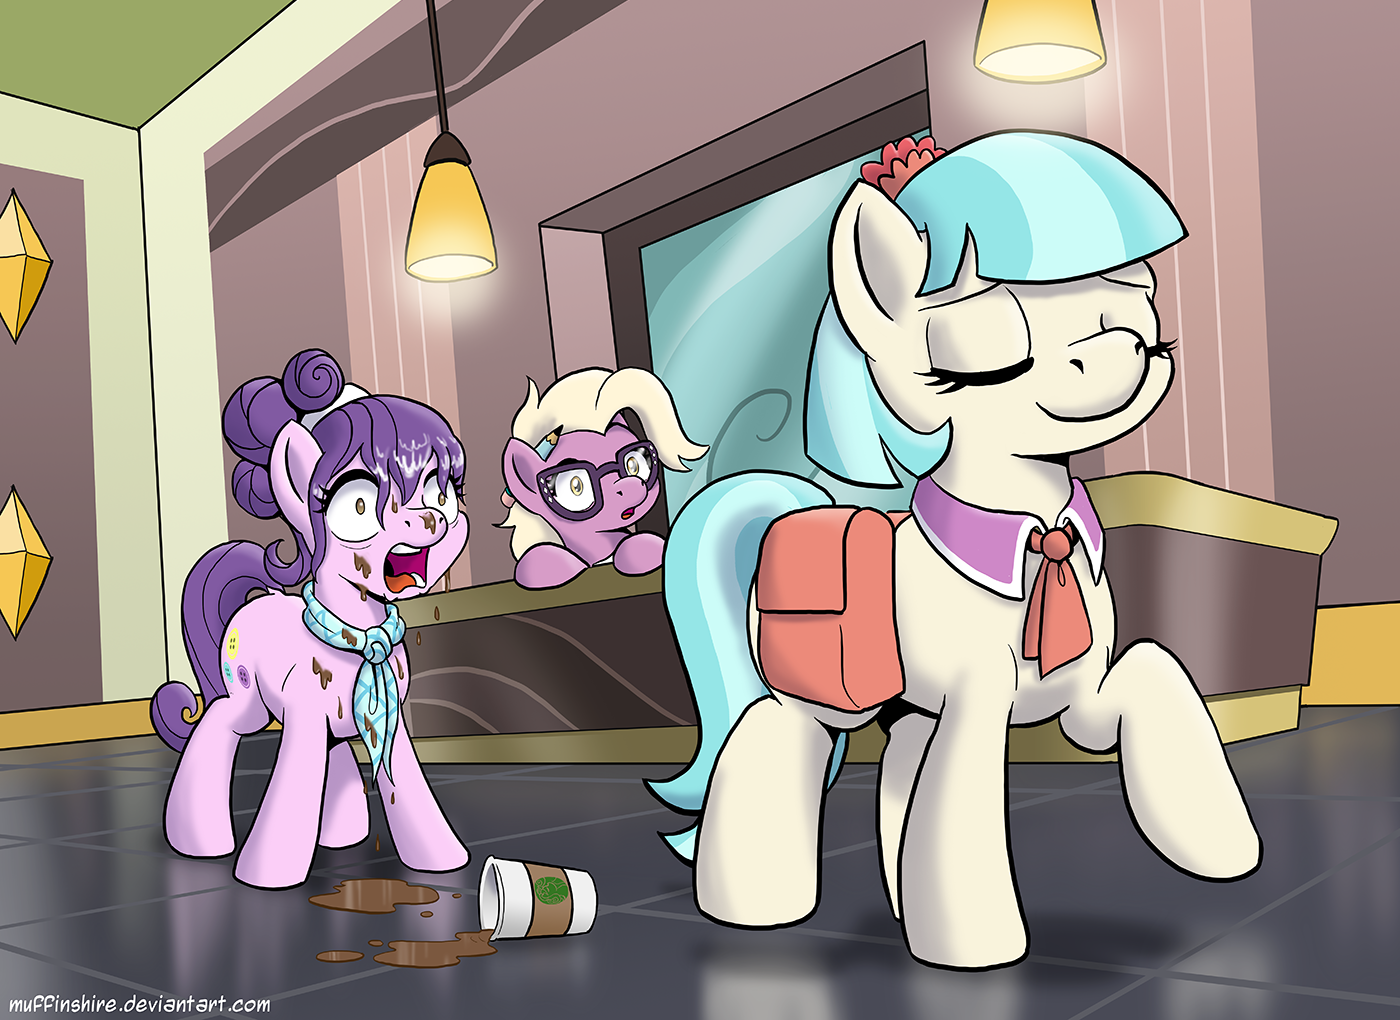 i_quit__by_muffinshire-d7103d6.png